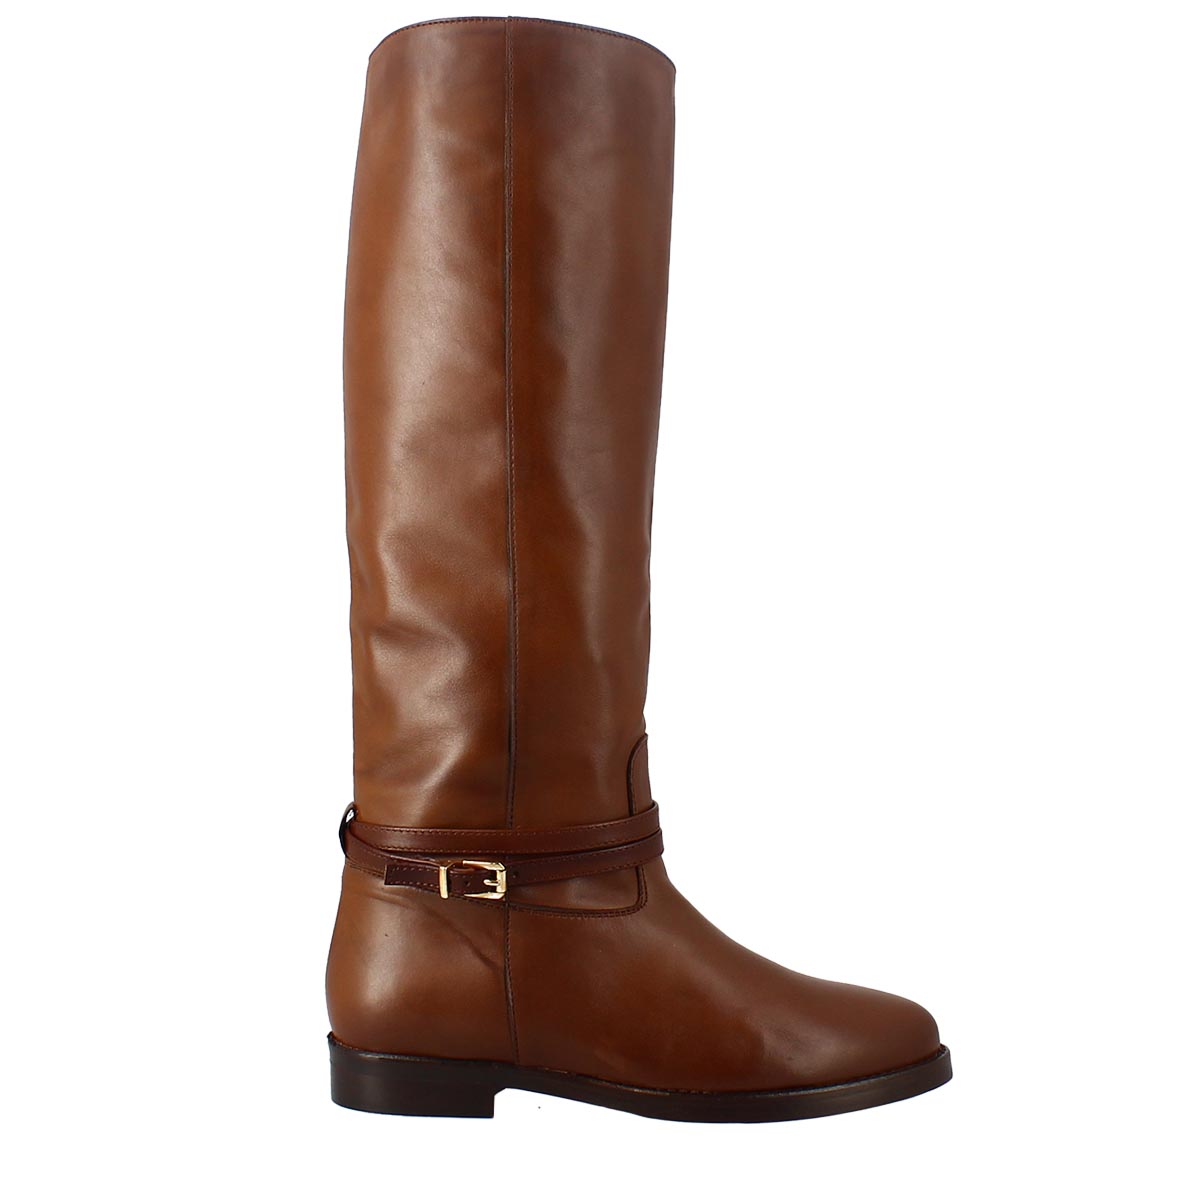 Women's knee-high riding style boot in brown leather